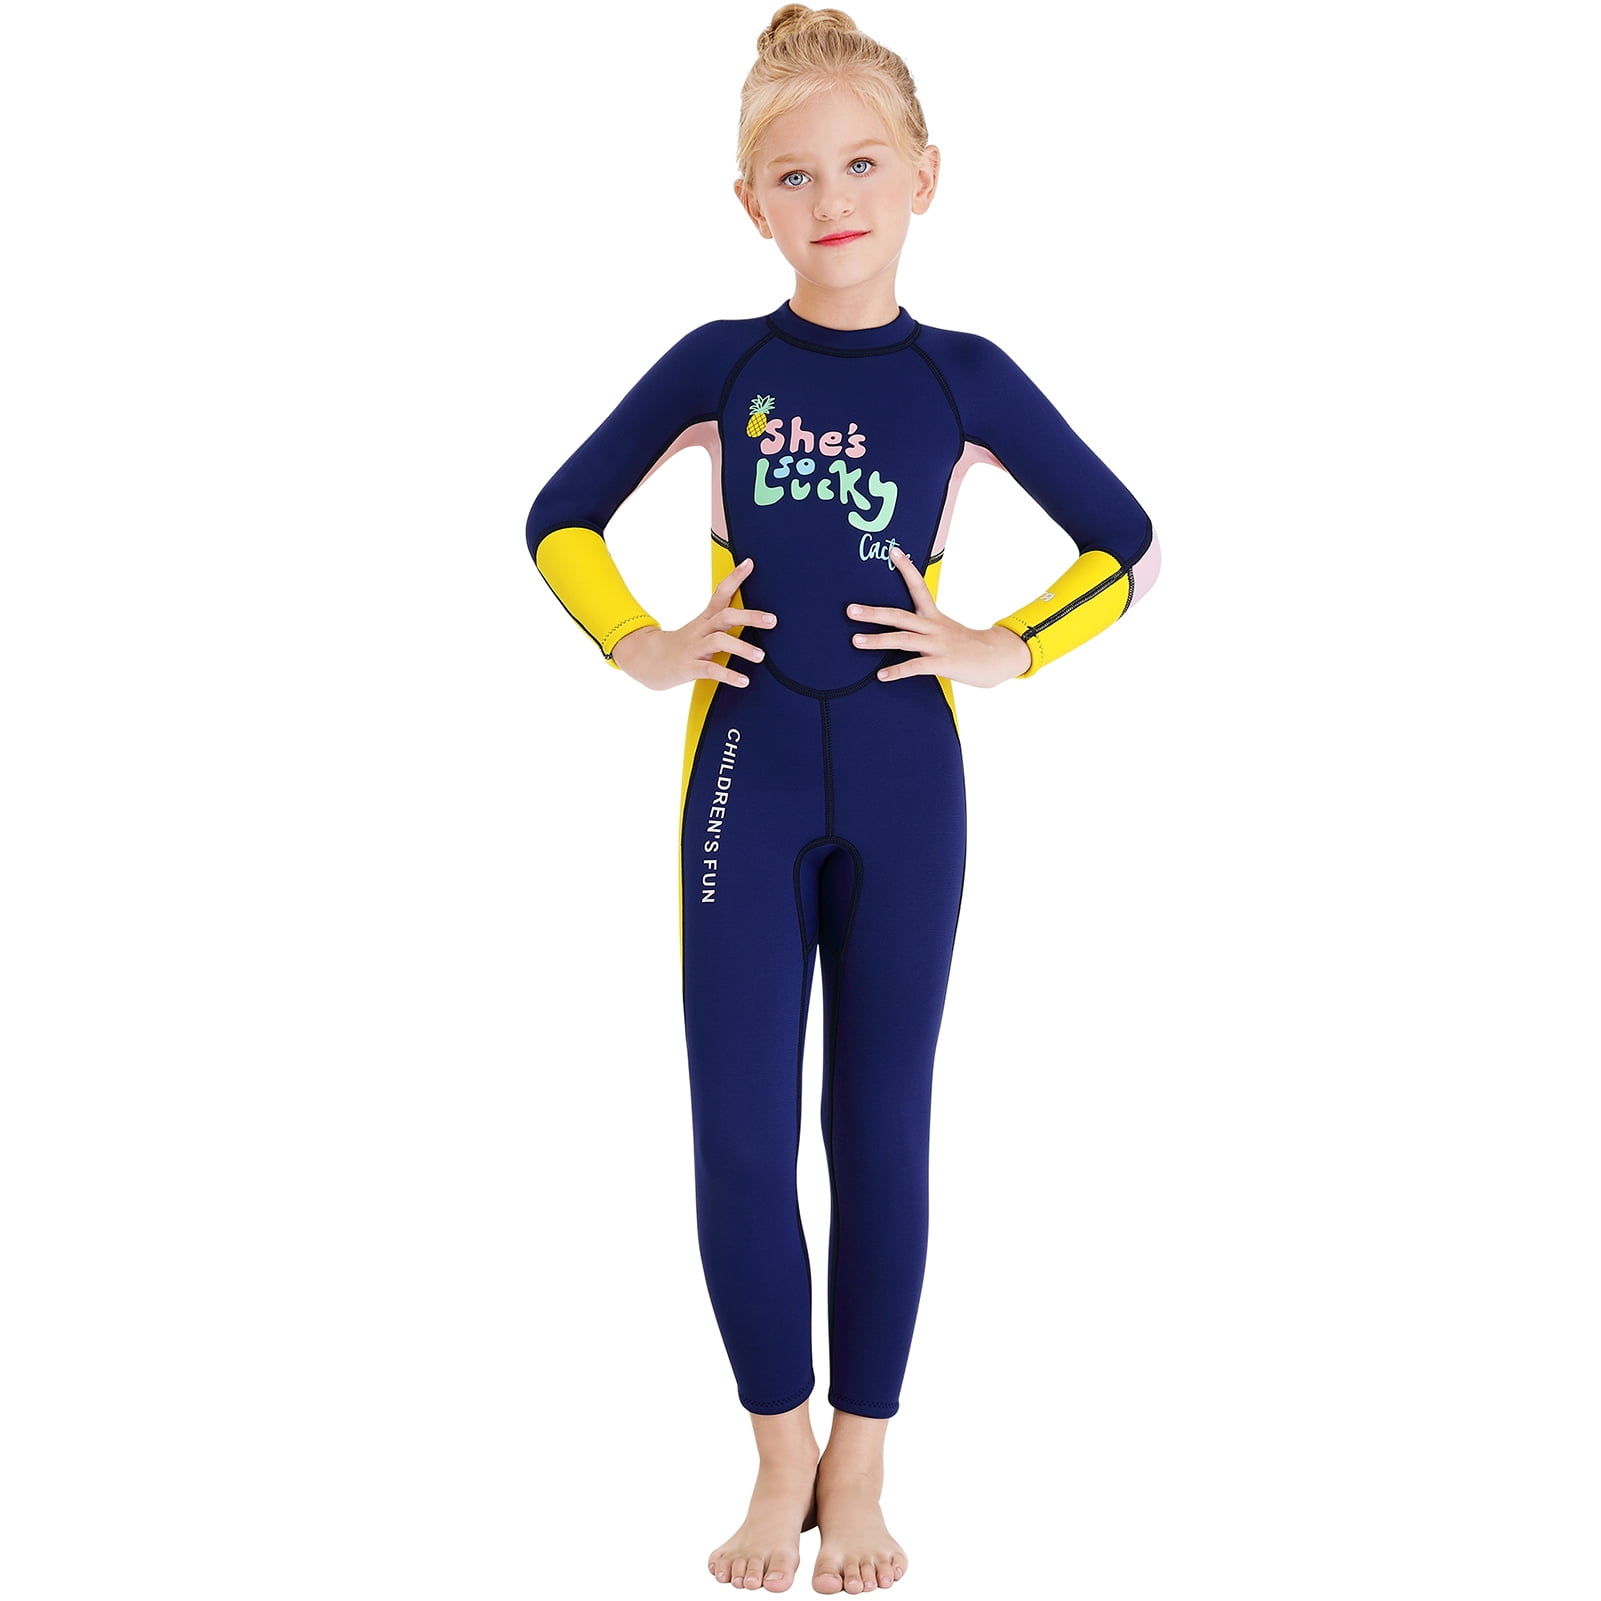 Details about   X-Manta Diving Suit Wetsuit One Piece Long Sleeve Swimwear Size Small Kids 